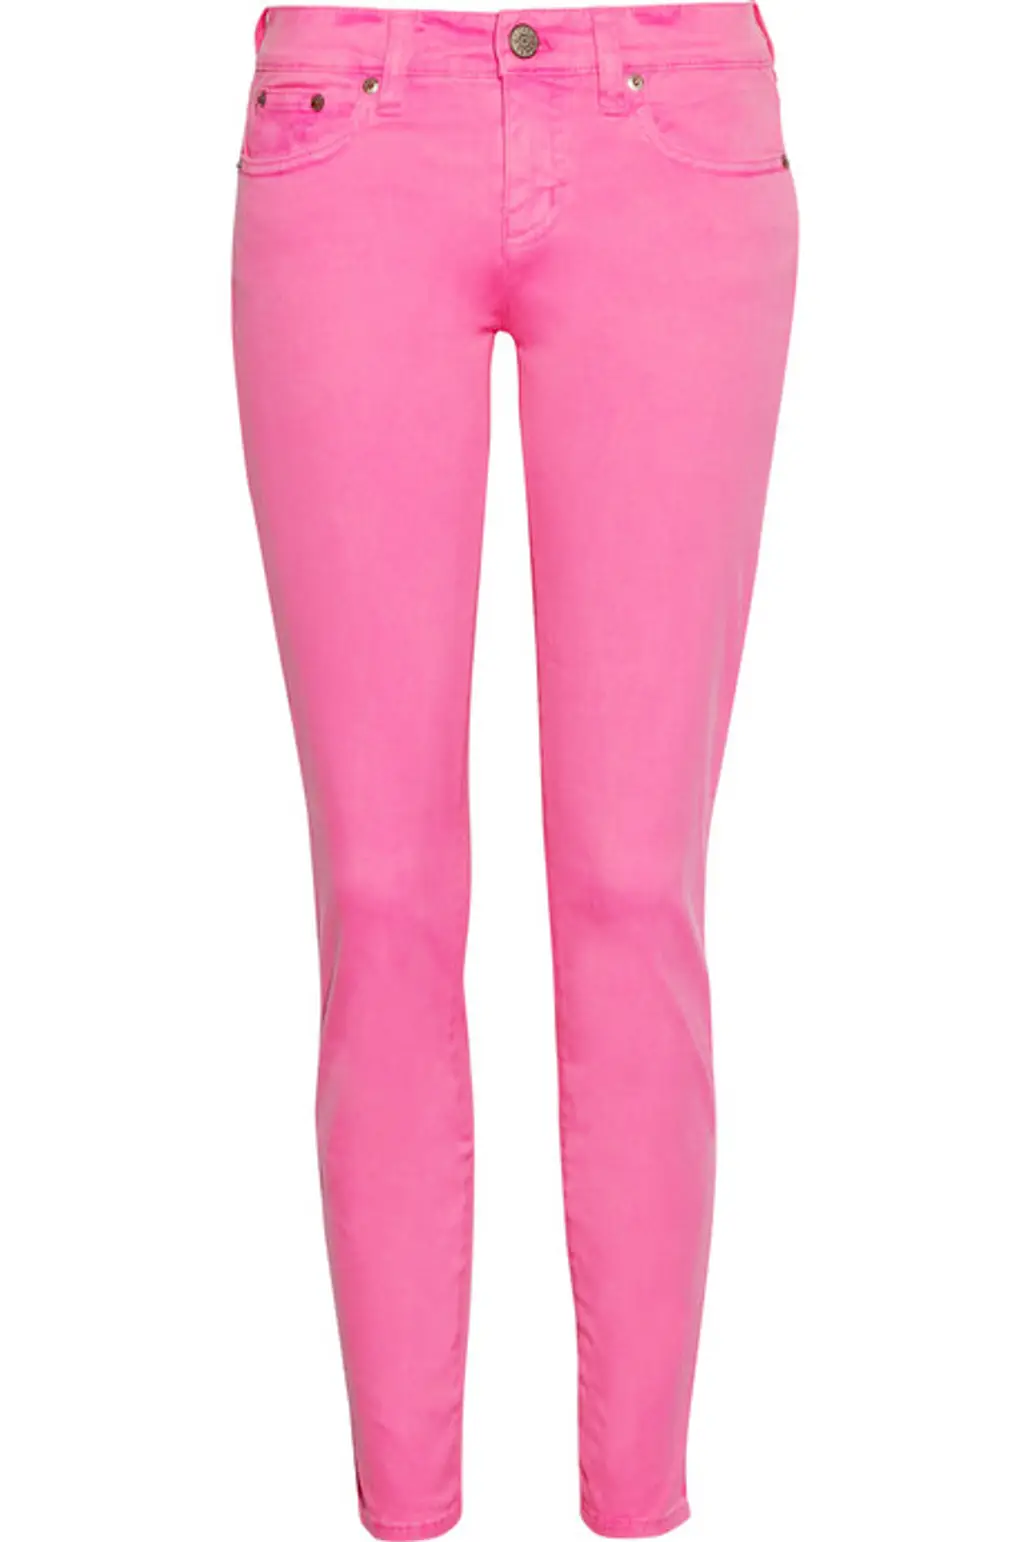 J.Crew Toothpick Cropped Neon Jeans